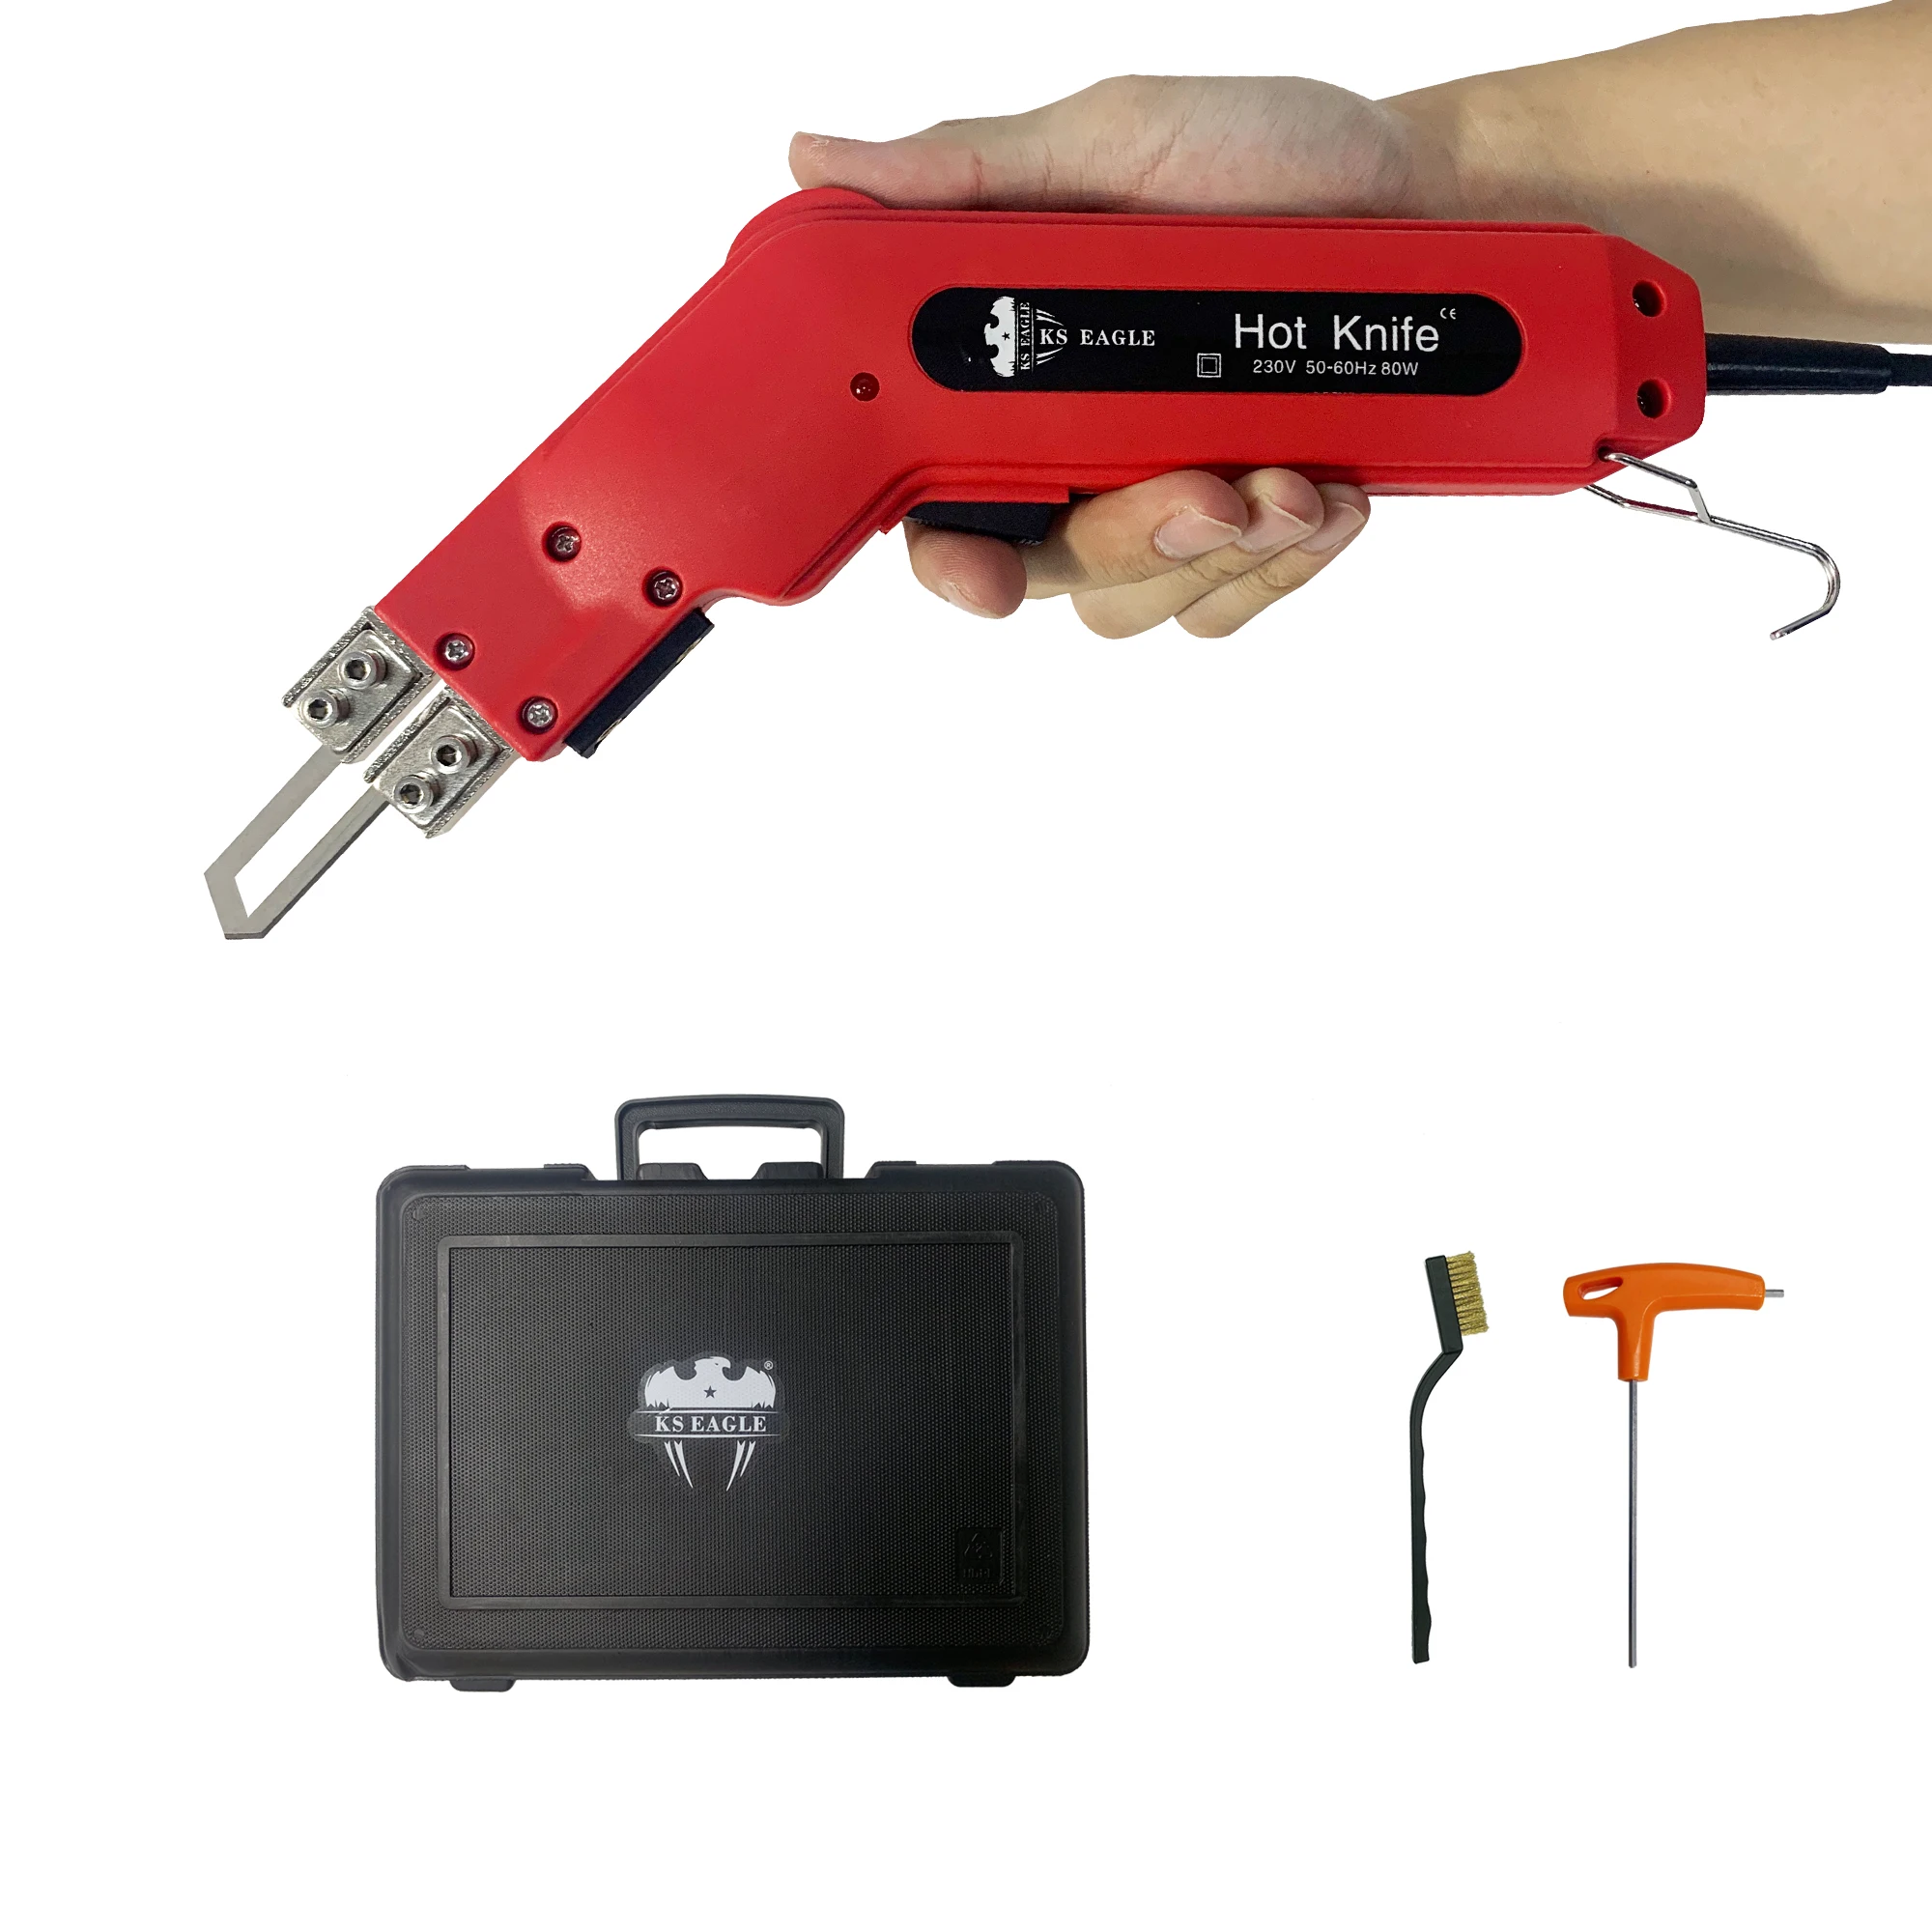 KS EAGLE Electric Hot Knife Thermal Cutter Hand Held Heat Cutter Foam Cutting Tools Non-Woven Fabric Rope Curtain Heating Knife ks eagle electric hot knife thermal cutter hand held heat cutter foam cutting tools non woven fabric rope curtain heating wire